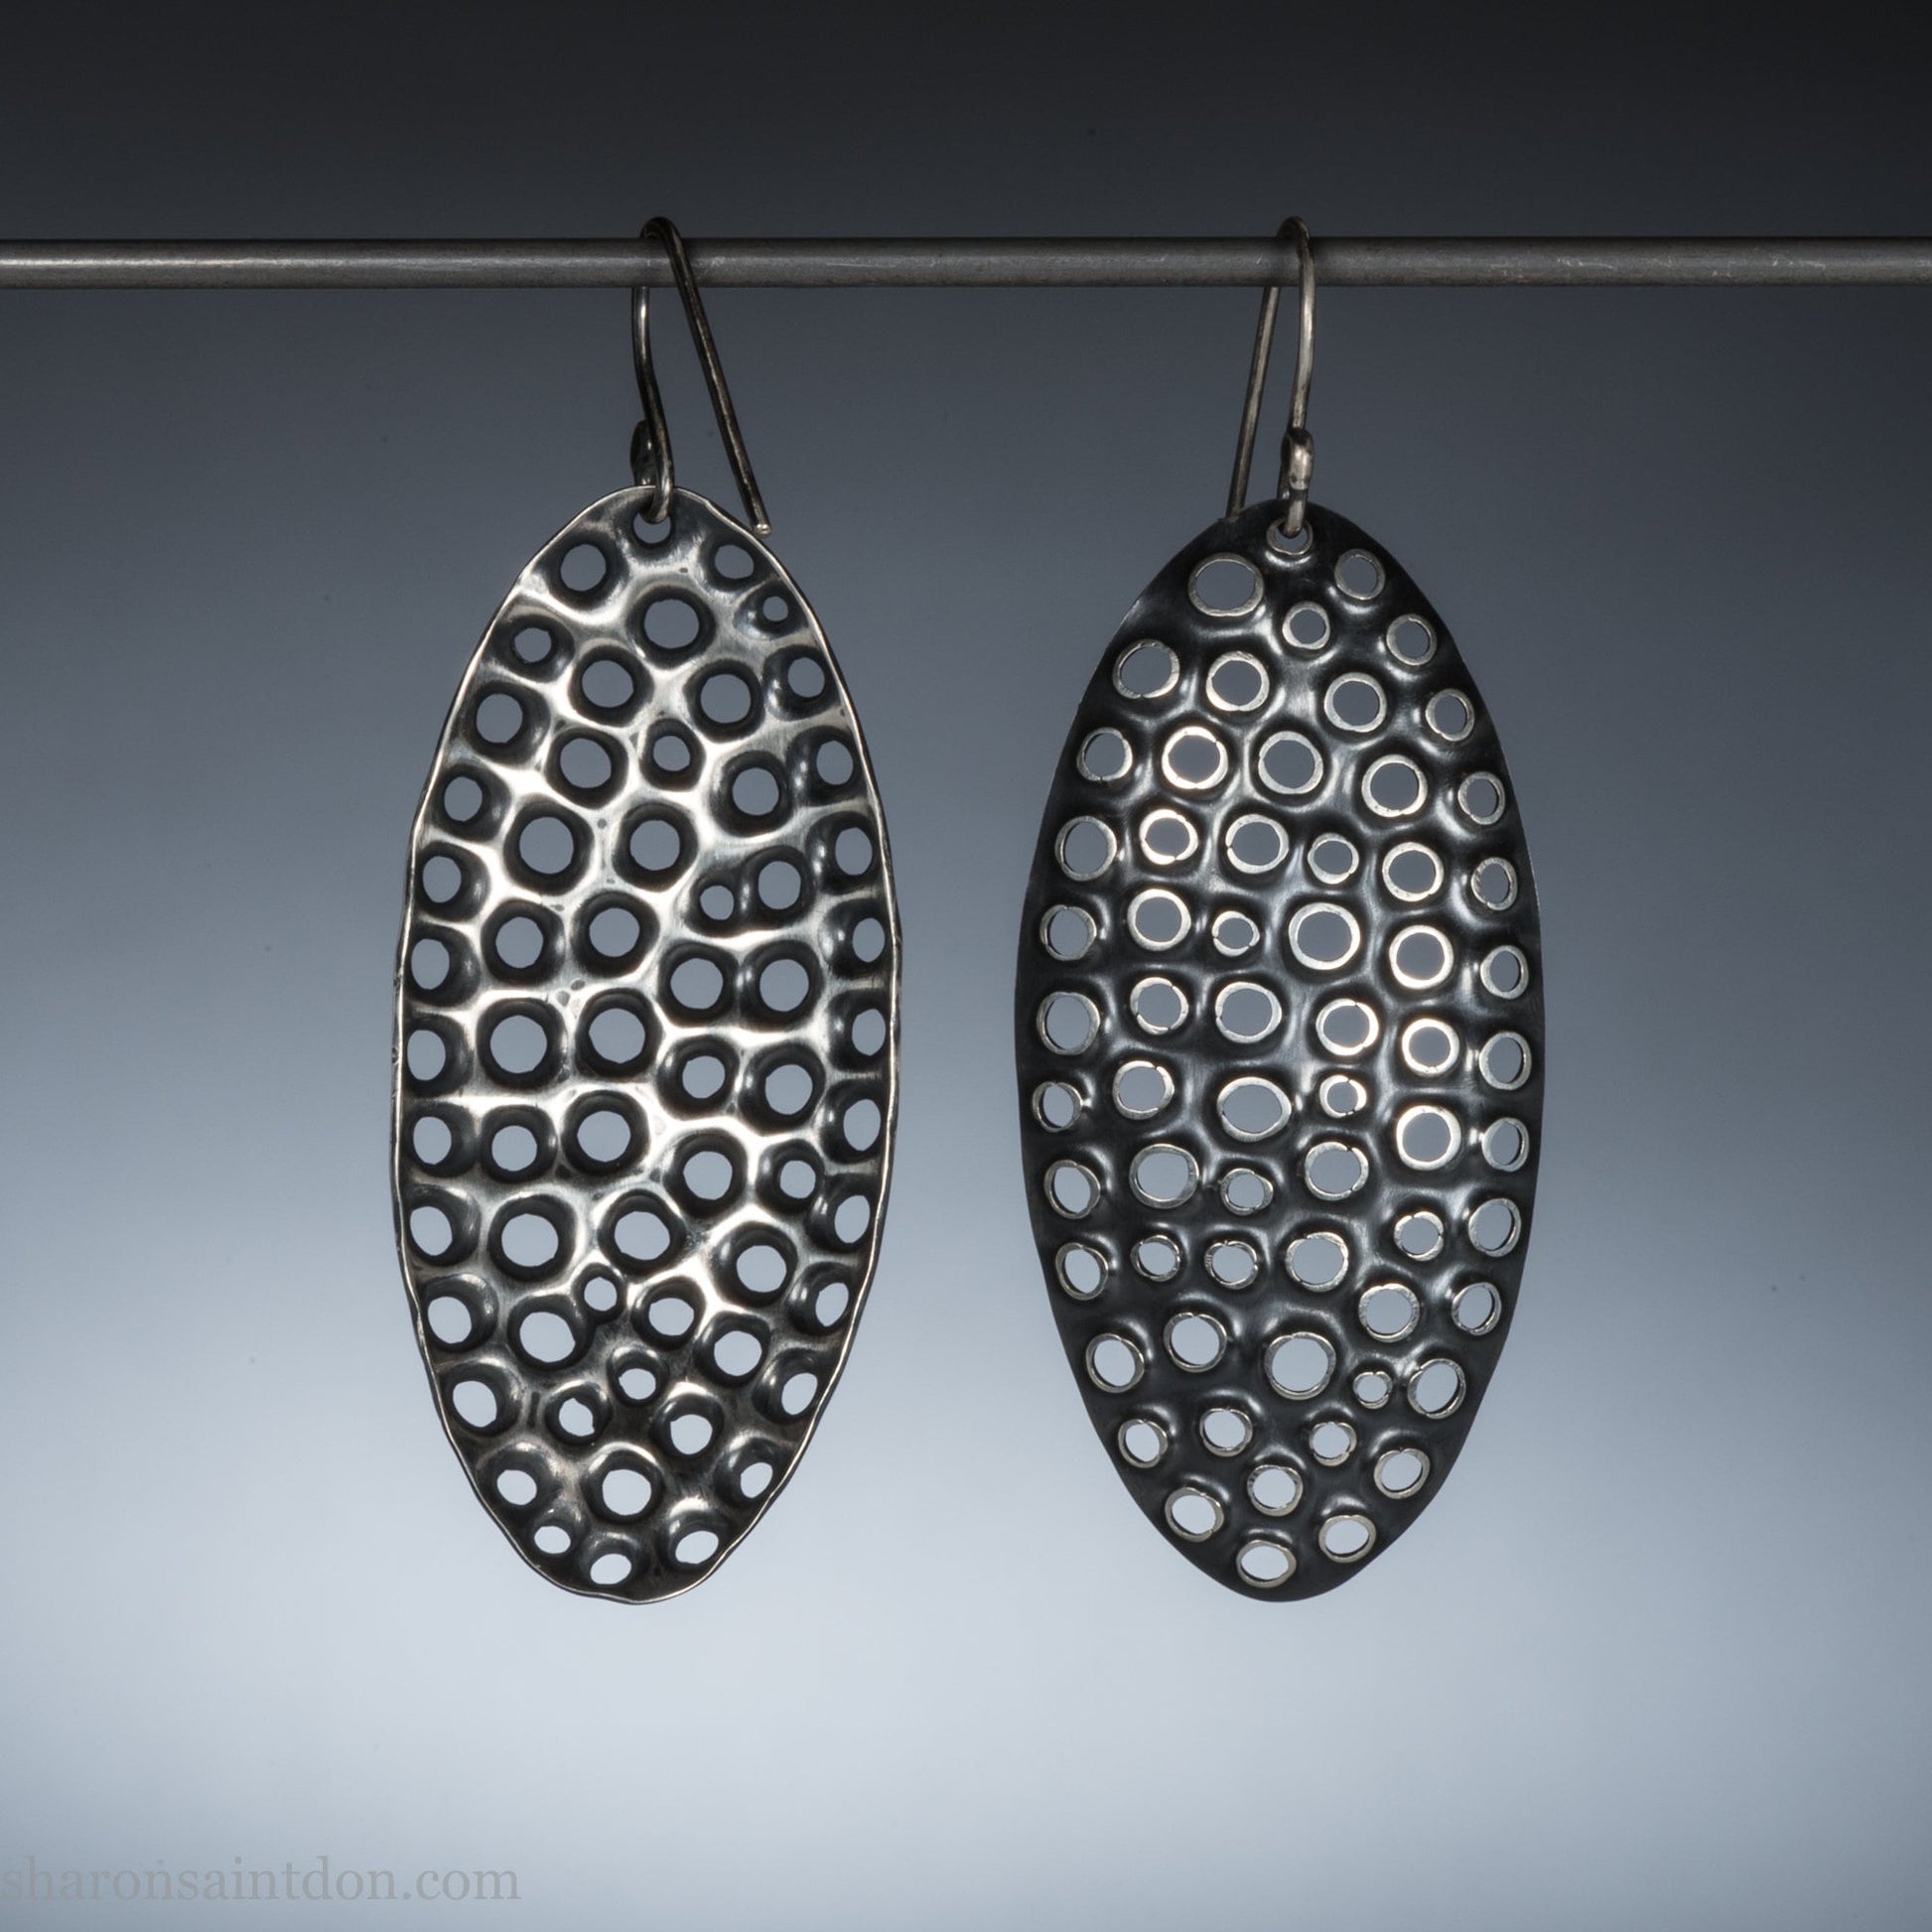 925 sterling silver handmade earrings for women. Comfortable, light, oval dangle earrings with mesh dots and ear wire hooks.